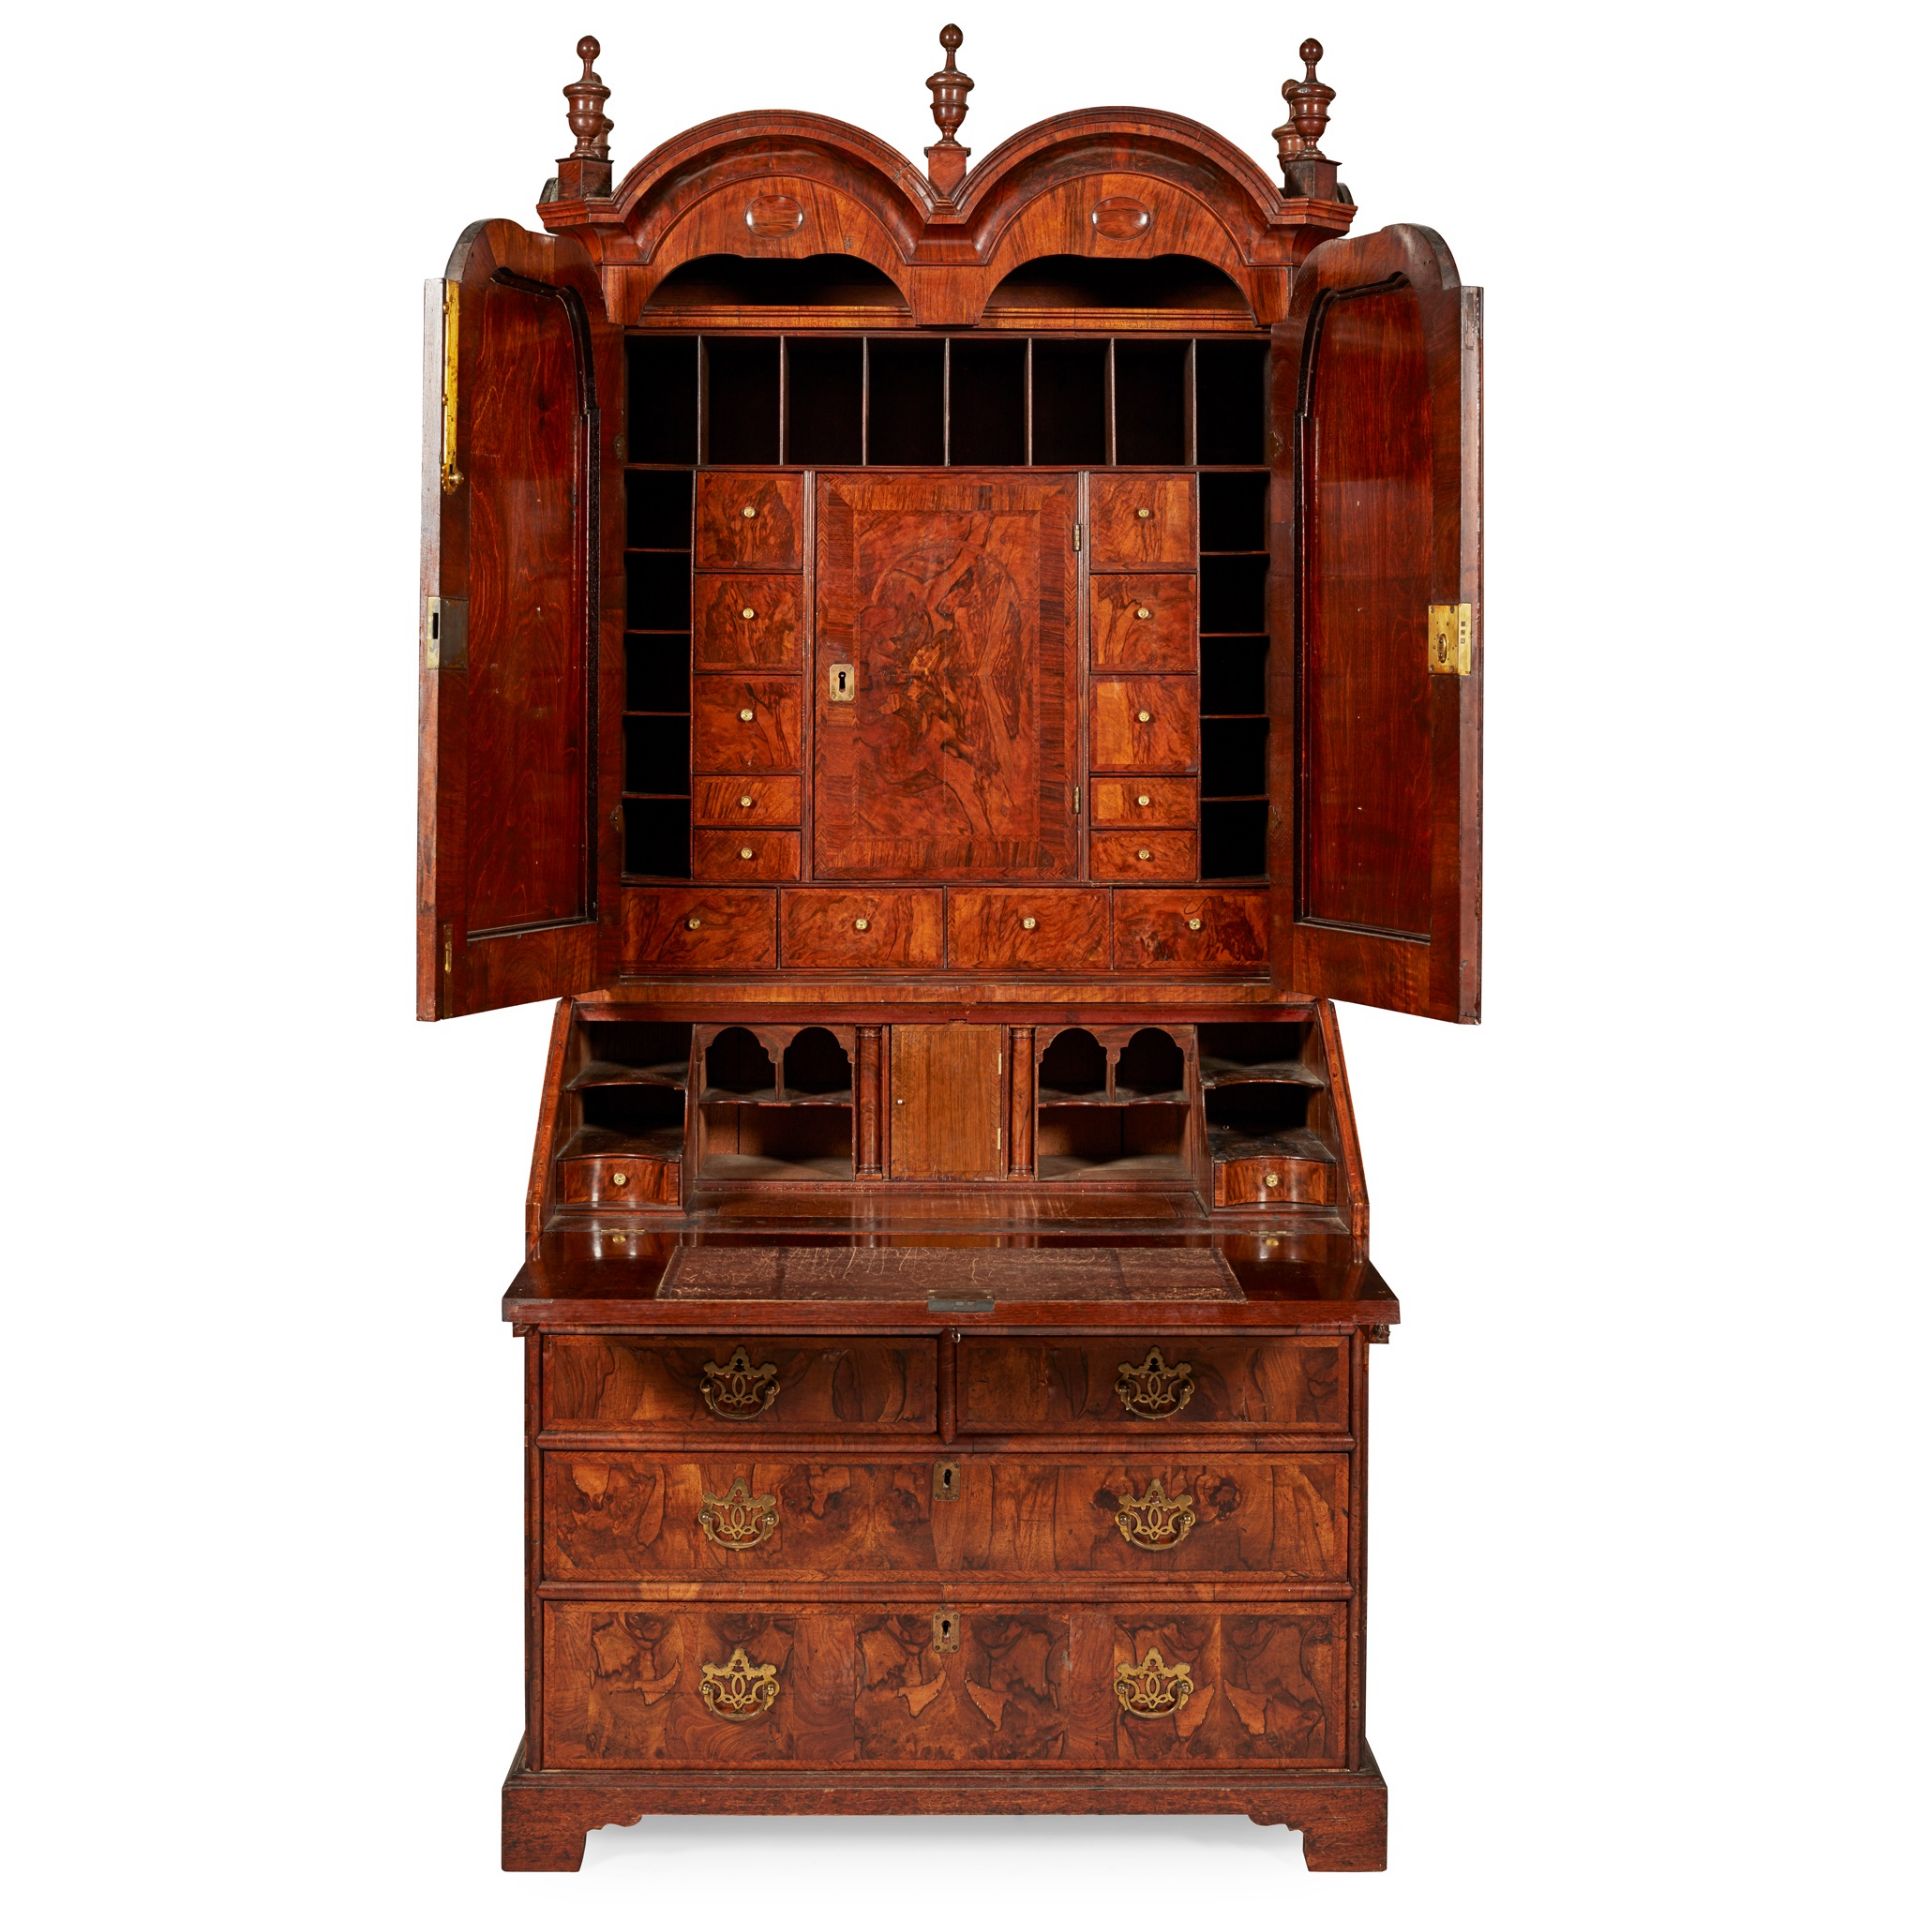 QUEEN ANNE WALNUT AND OAK BUREAU BOOKCASE EARLY 18TH CENTURY, AND LATER